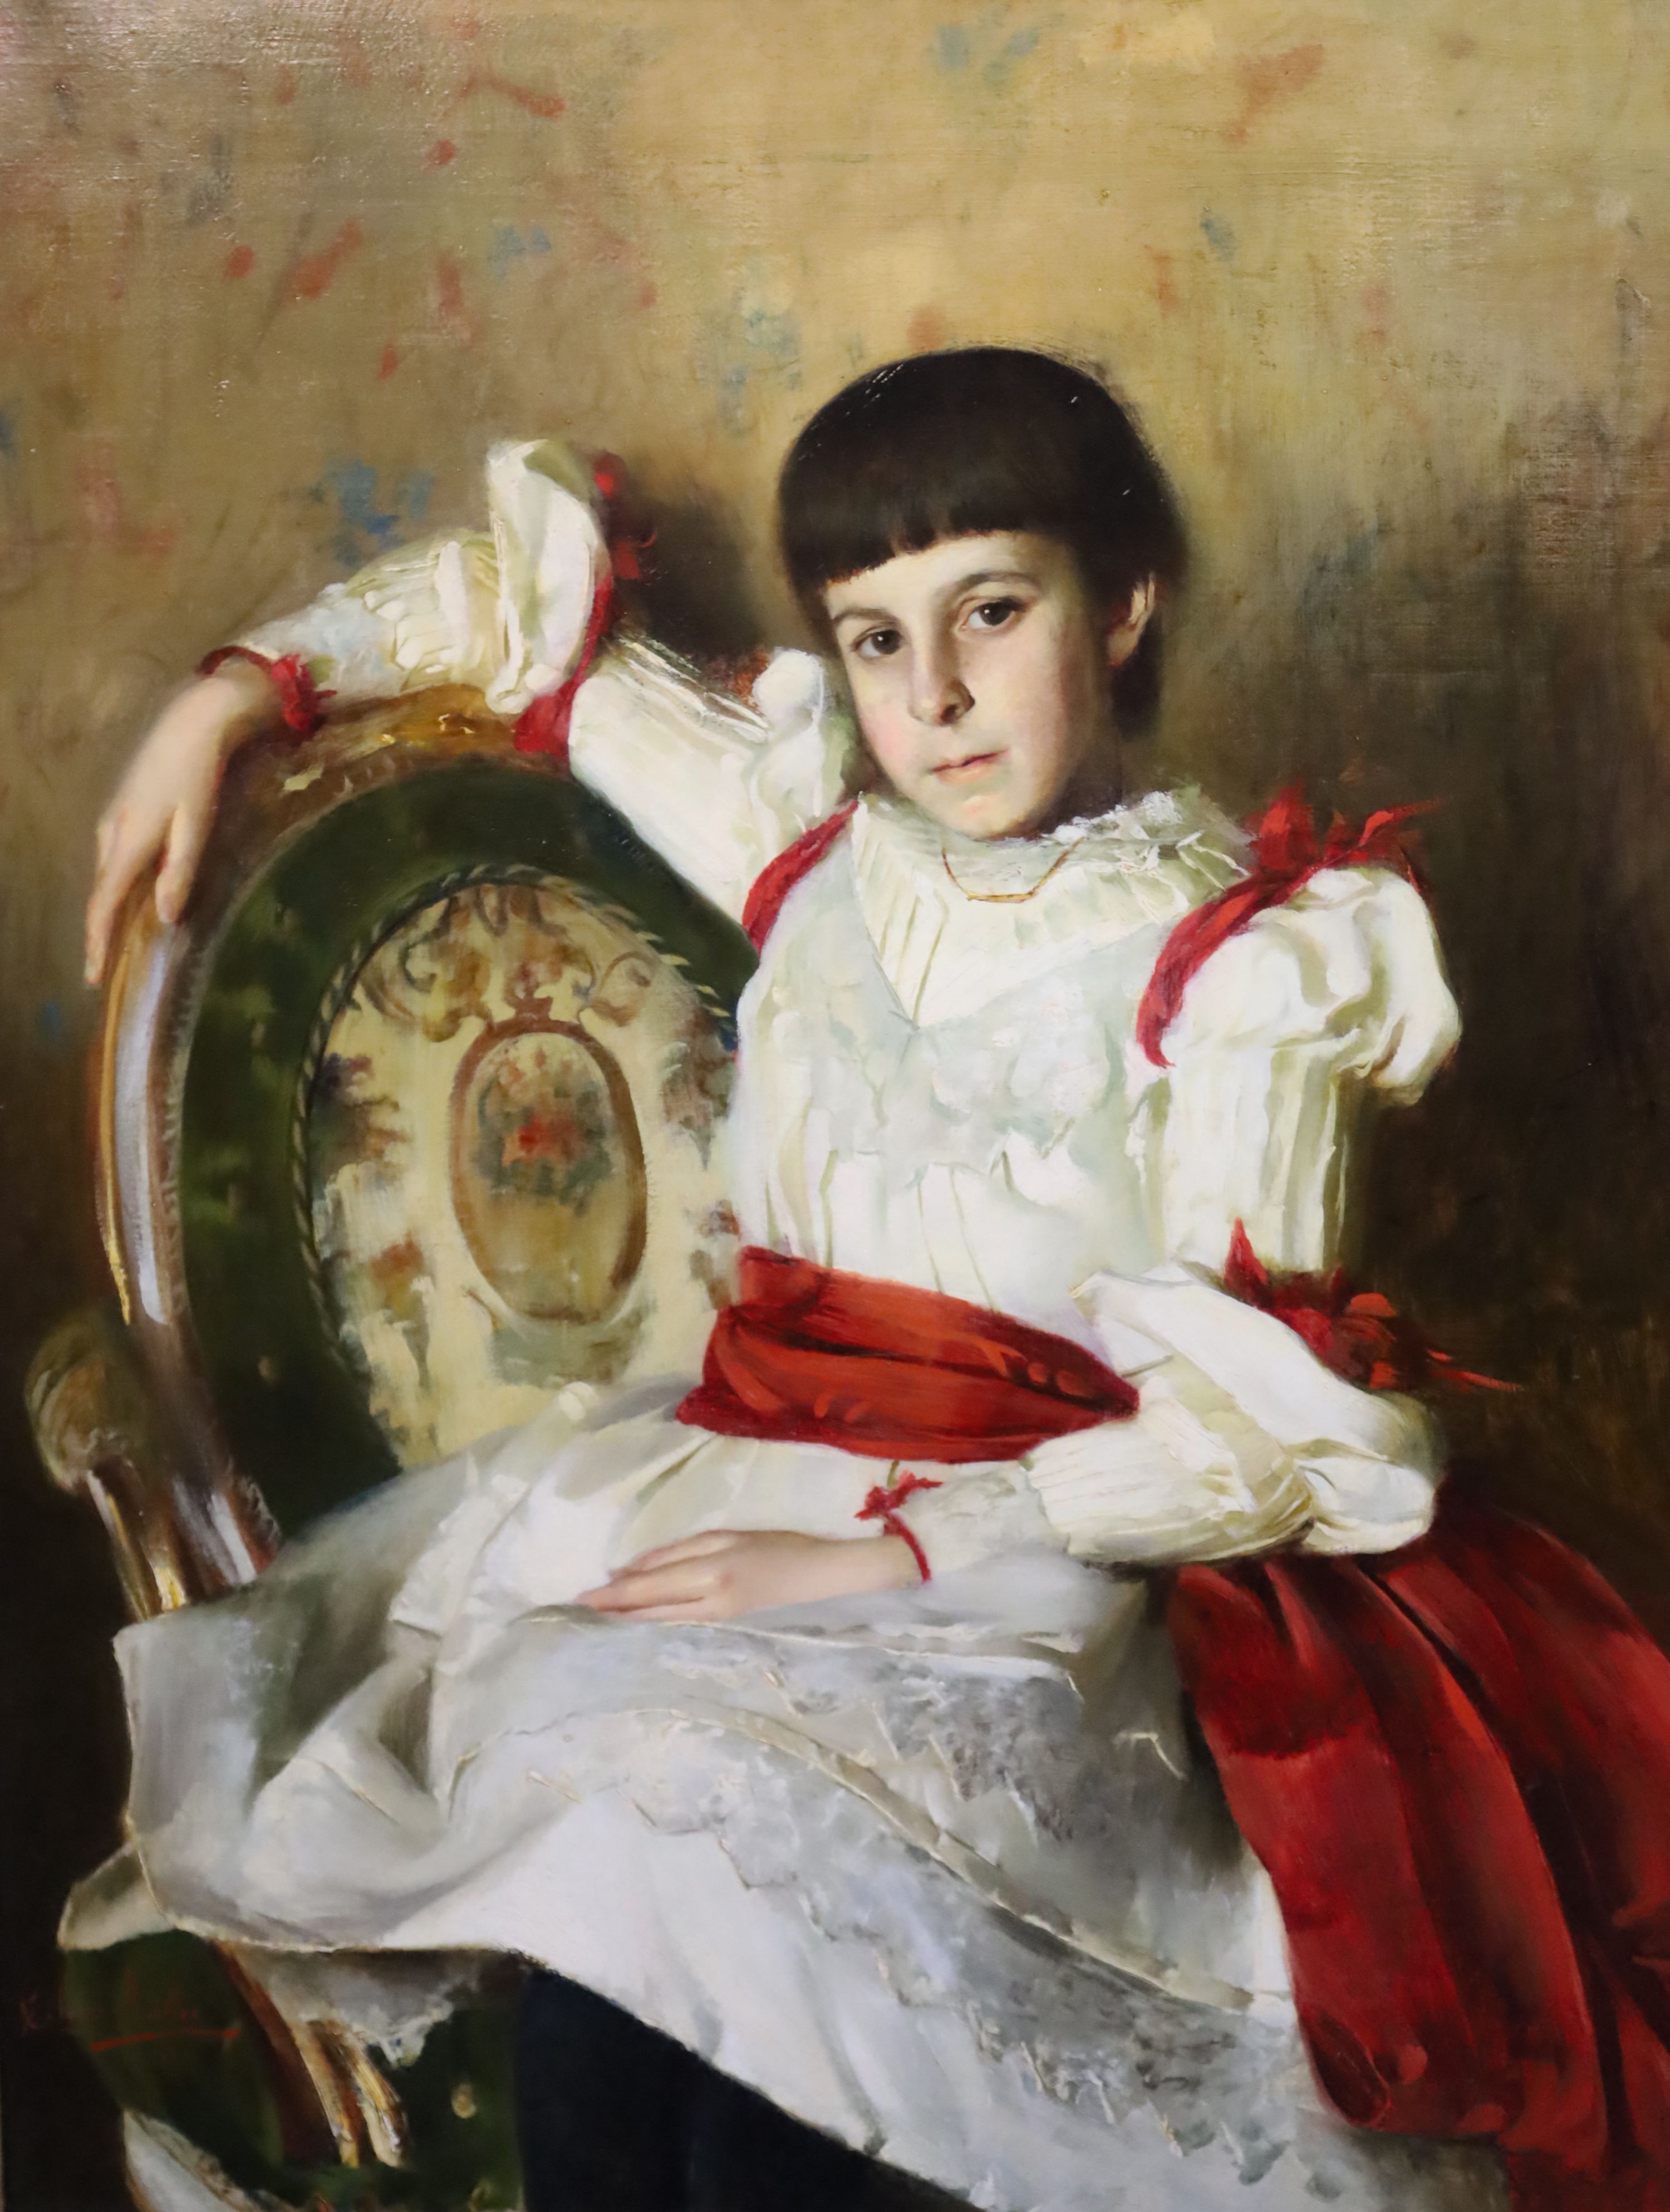 Clara Muller (19th C.), Portrait of a girl seated upon an armchair, oil on canvas, 73.5 x 94cm